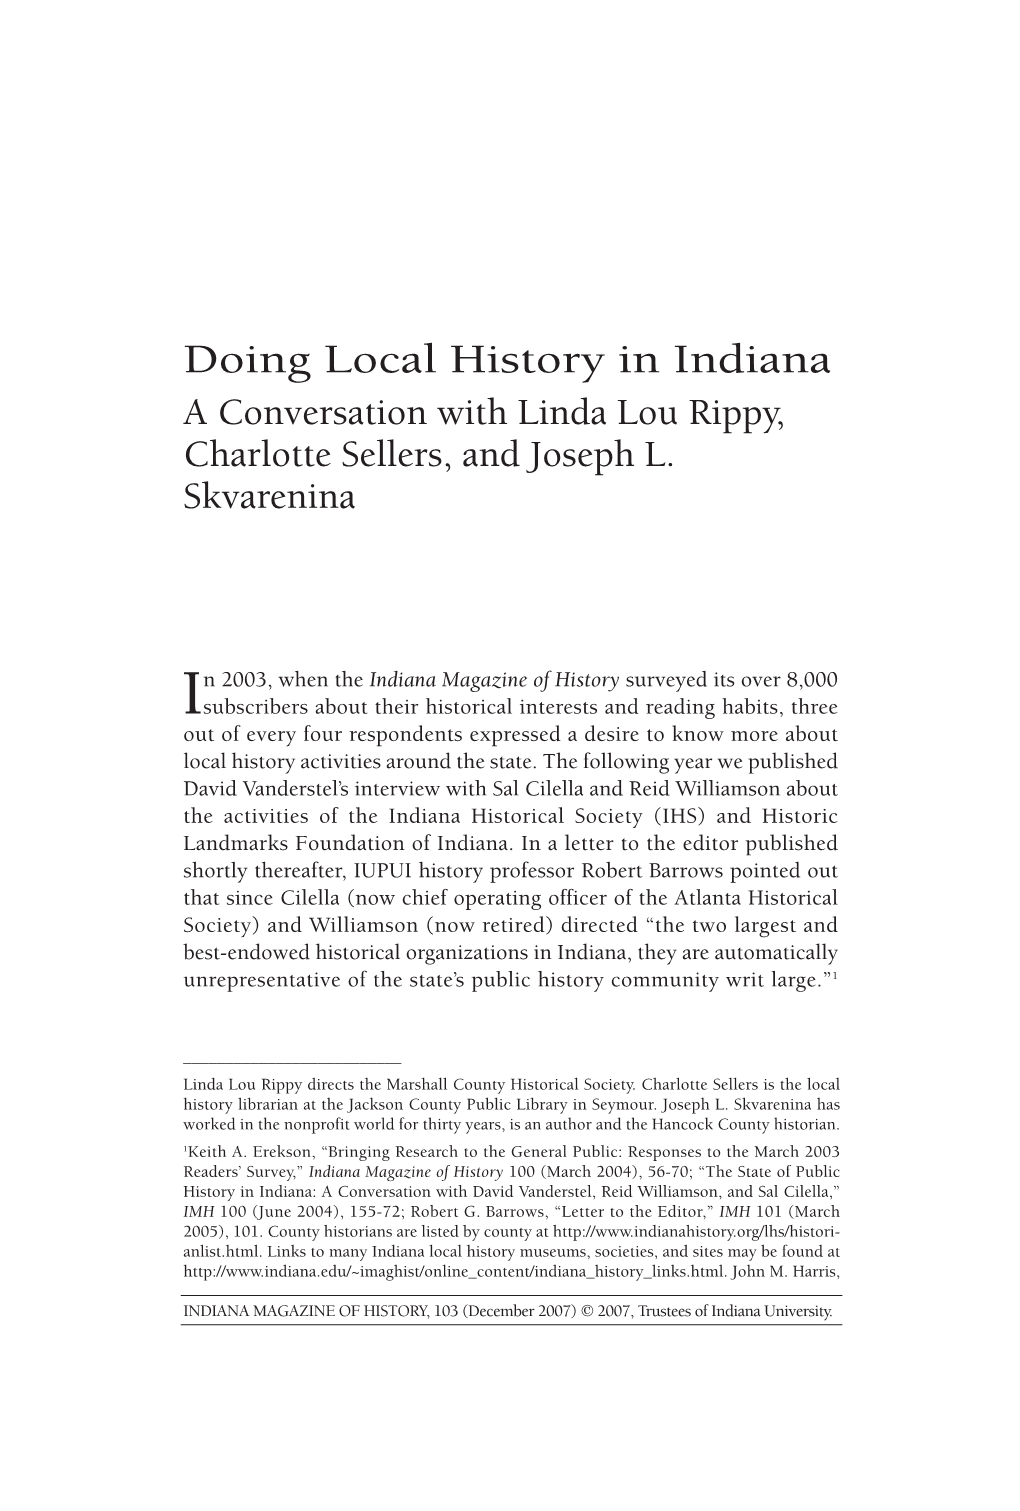 Doing Local History in Indiana a Conversation with Linda Lou Rippy, Charlotte Sellers, and Joseph L